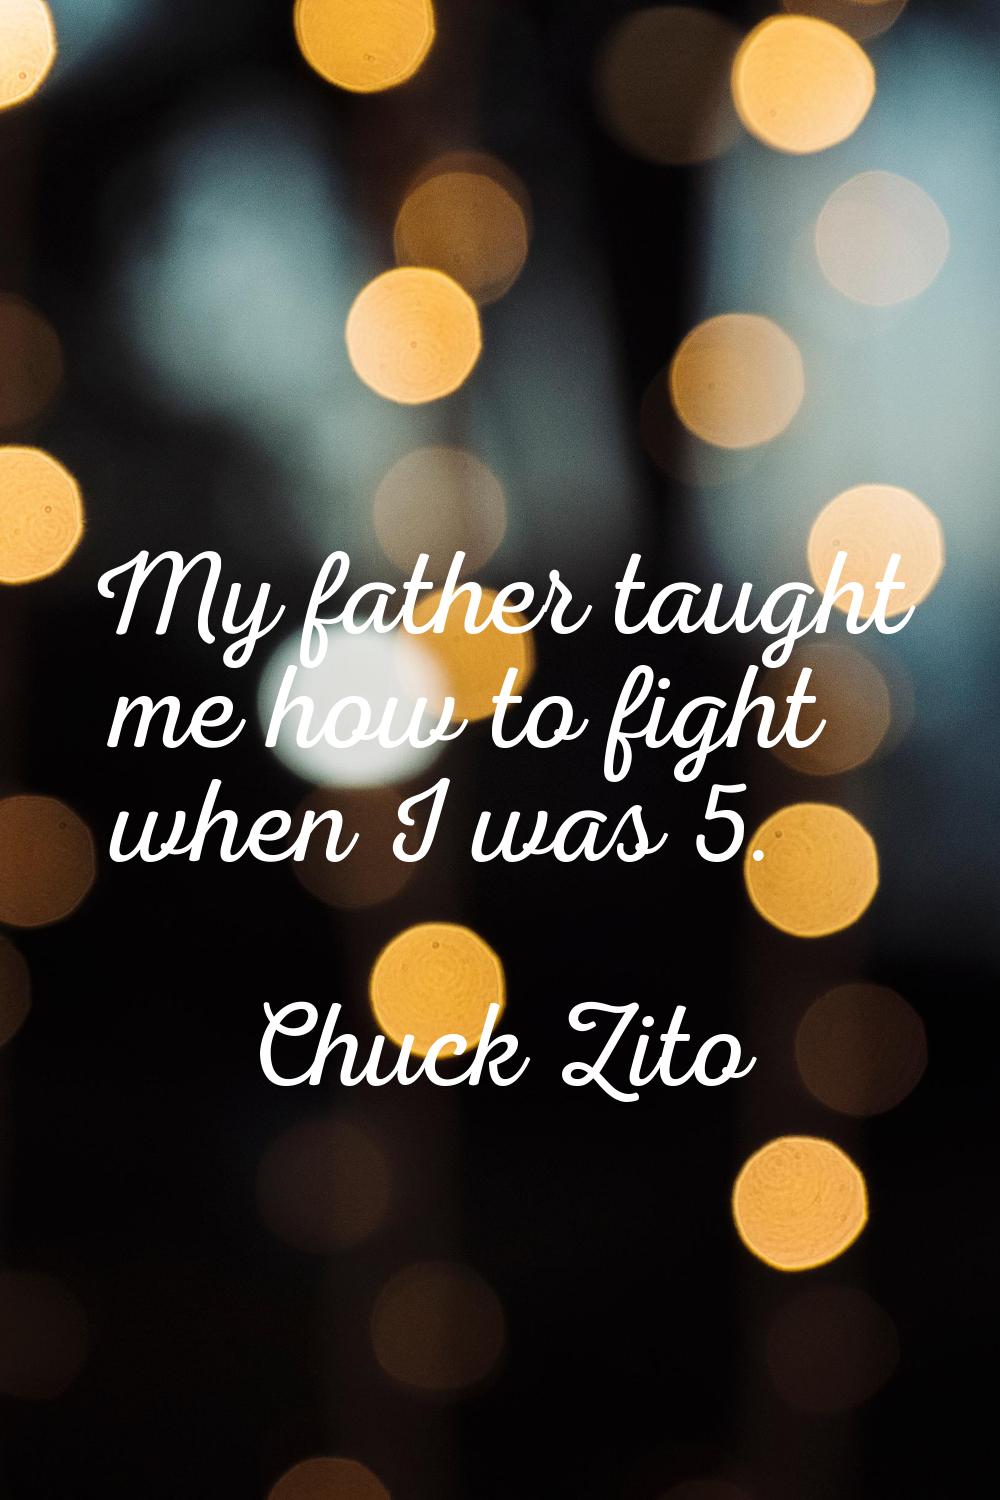 My father taught me how to fight when I was 5.